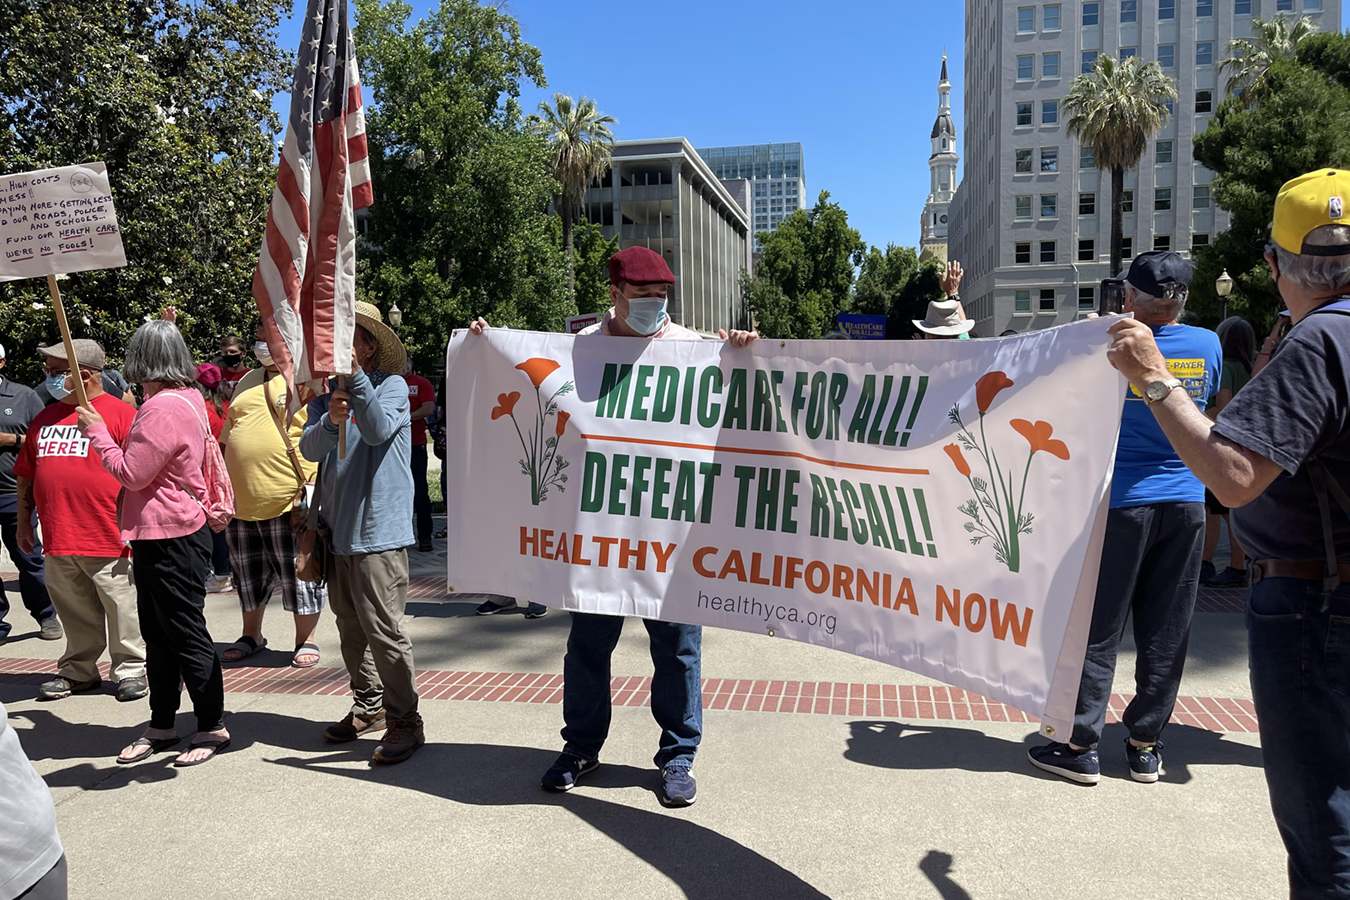 Protesters hold up a sign that reads, "Medicare for All! Defeat the Recall! Healthy California Now."